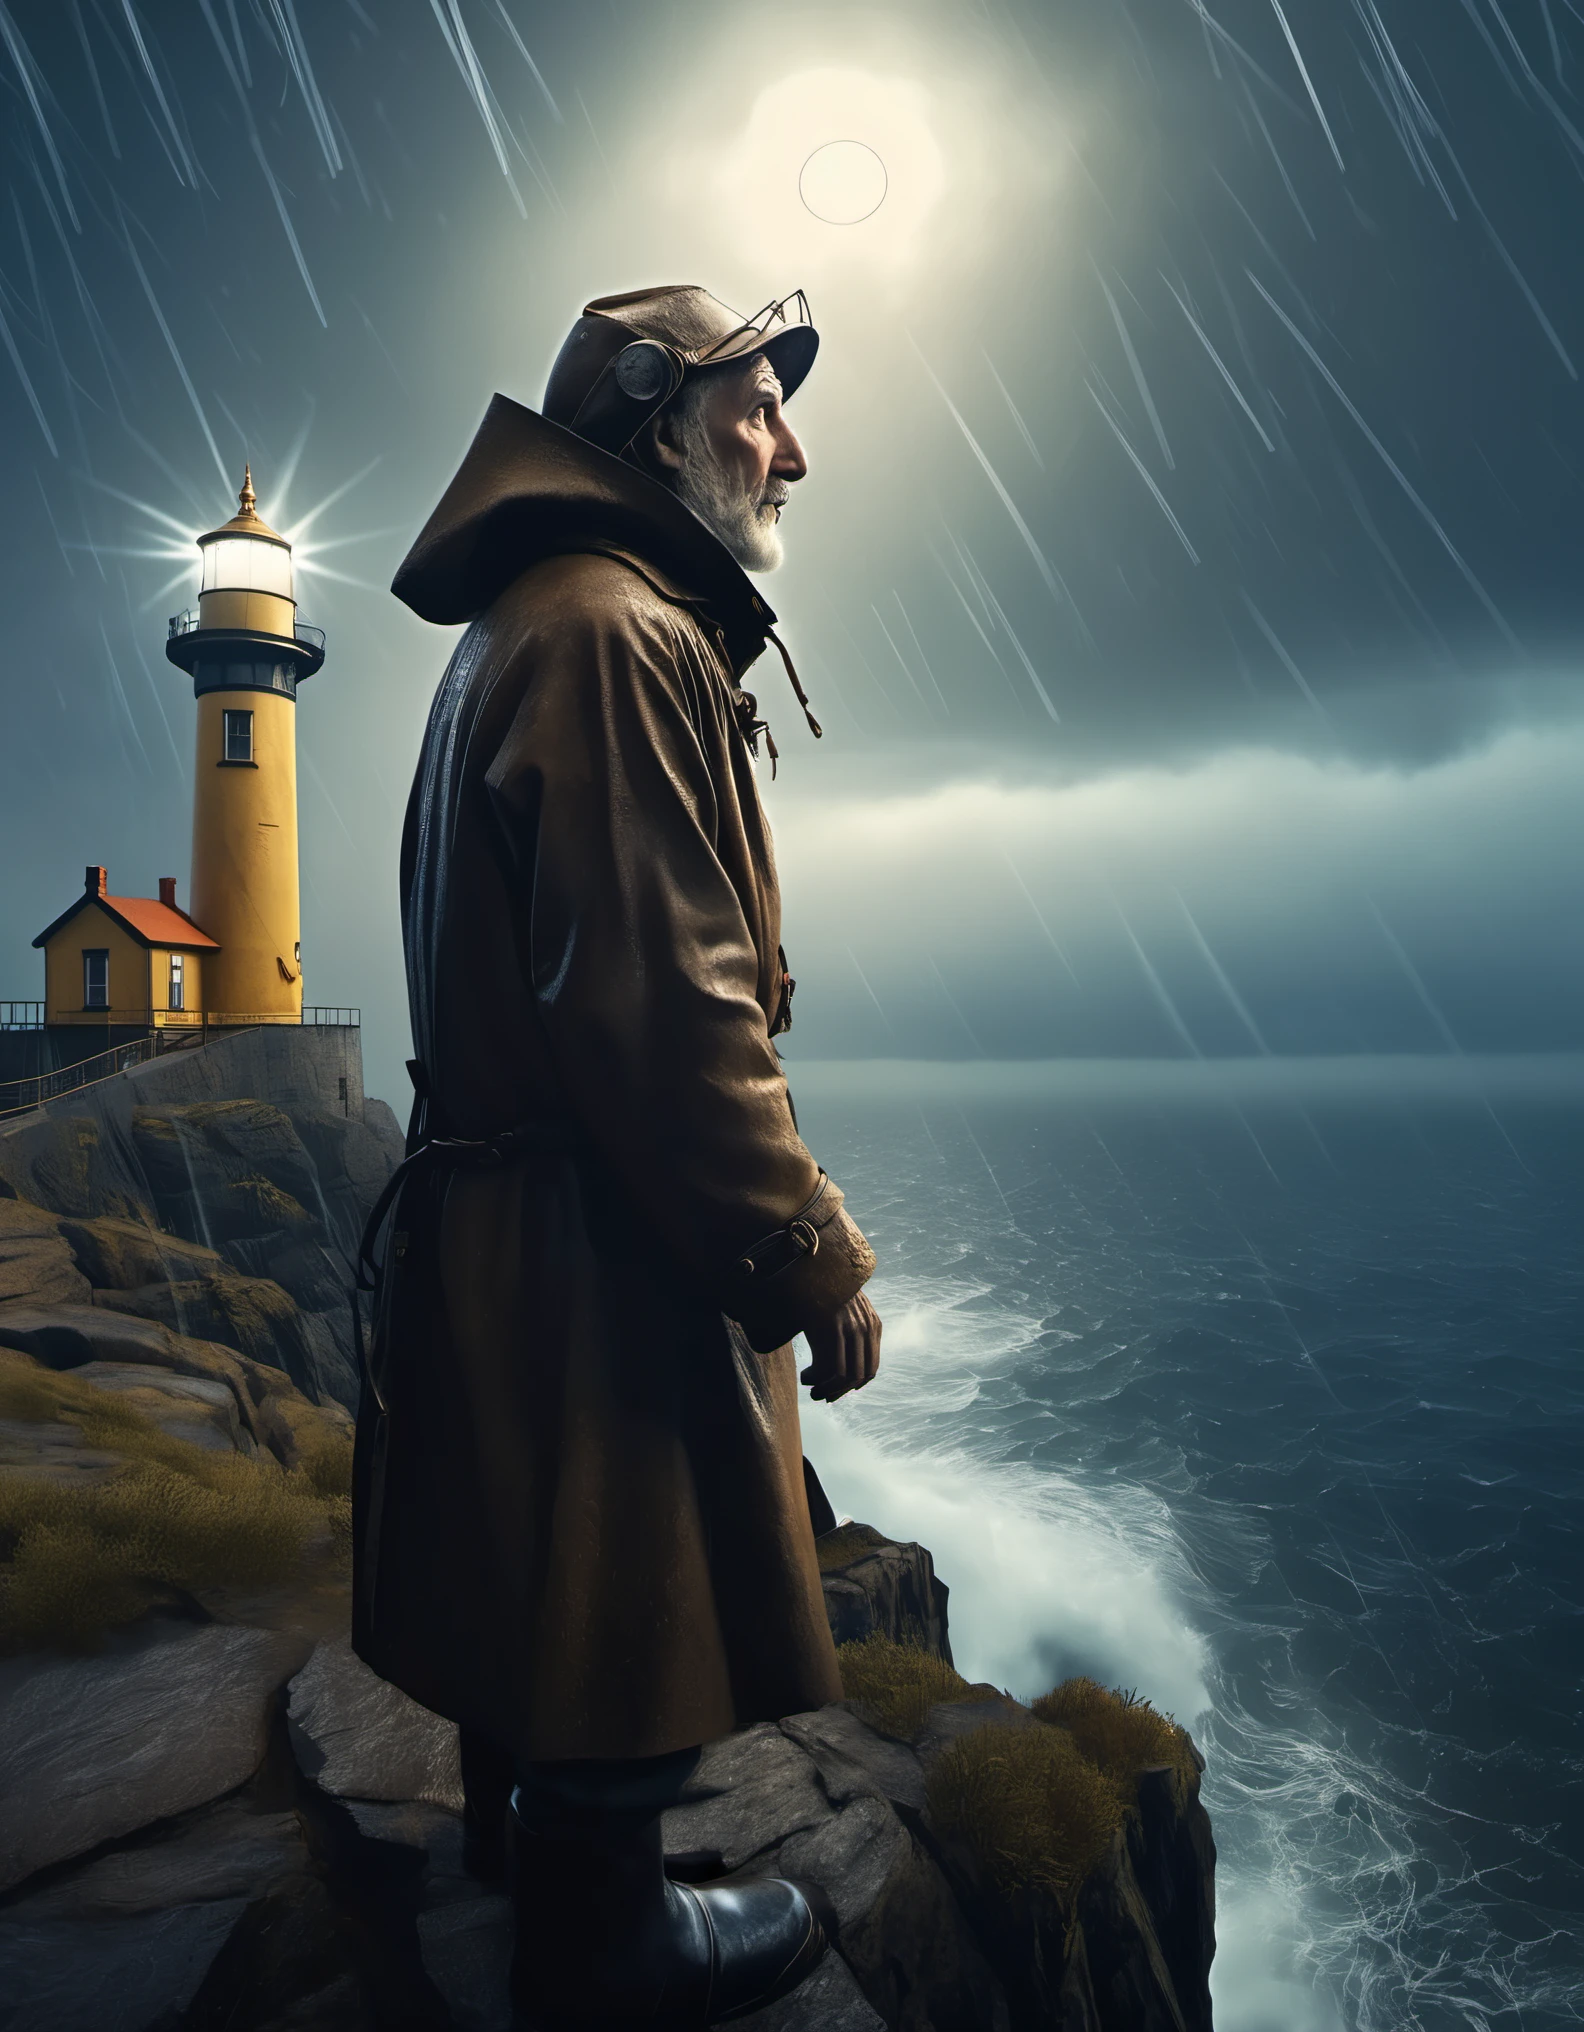 (A close-up of a tower keeper standing on a towering lighthouse on the cliff with a searchlight held high), he is looking down to guide the boat in the distance. He has rough brown skin and a carved wrinkled face. He is vicissitudes of life, wearing a hooded raincoat, surging waves, light beams, moonlight, background: rainstorm is falling, photography, Andre Remnev, masterpiece, Kont, realism, Diablo, Gothic art, Strong atmosphere, illusory engine, Quixel Megascans rendering, V-Ray, high details, high quality, high resolution, artistic stage trends, surrealism, high-definition, 16K, depth of field (Dof), waist shot (WS), close-up, Rembrandt lighting, epic visual effects, top view,